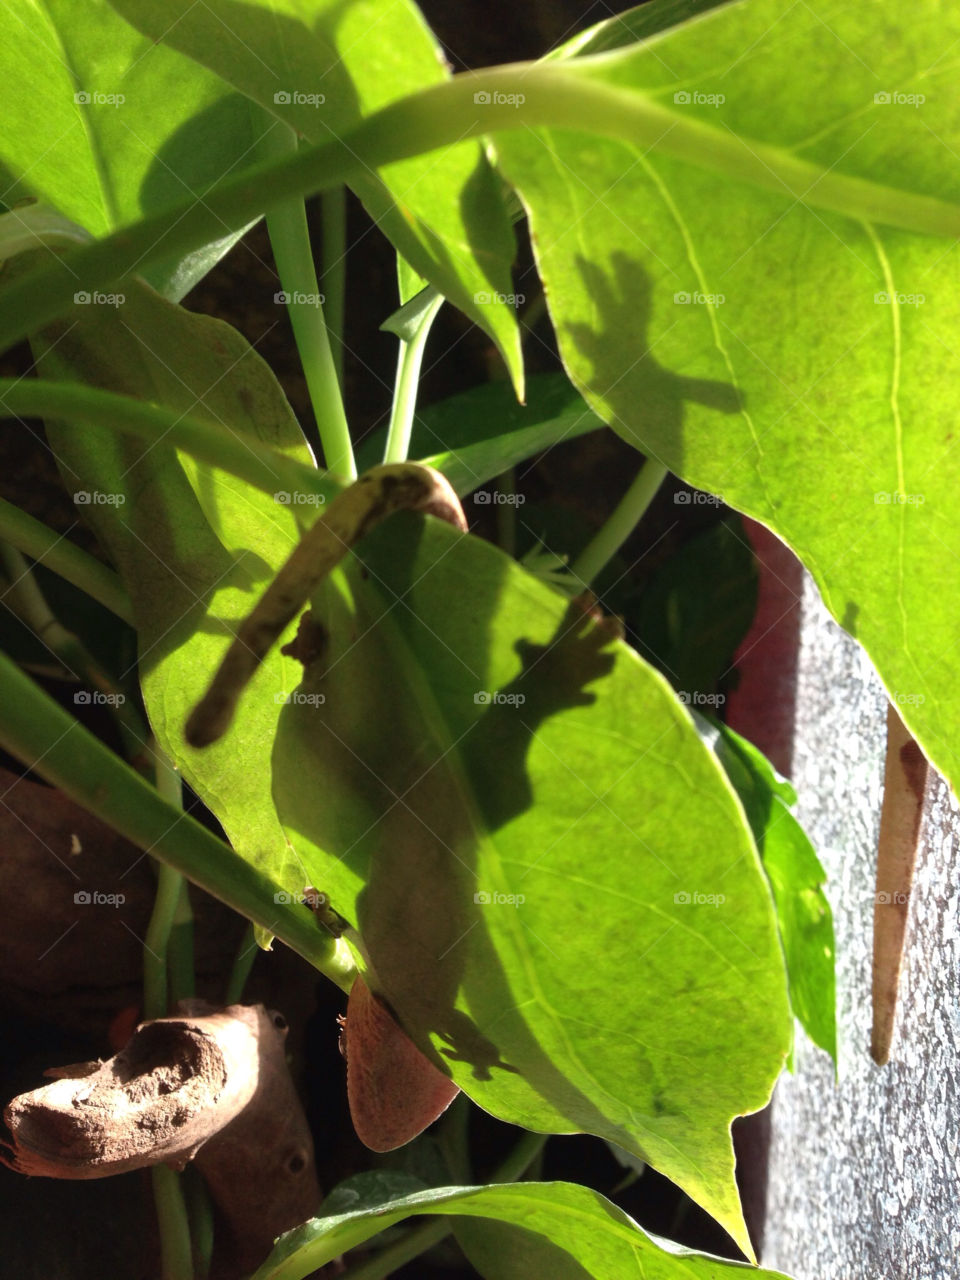 Crested gecko basking in the sun on a leaf